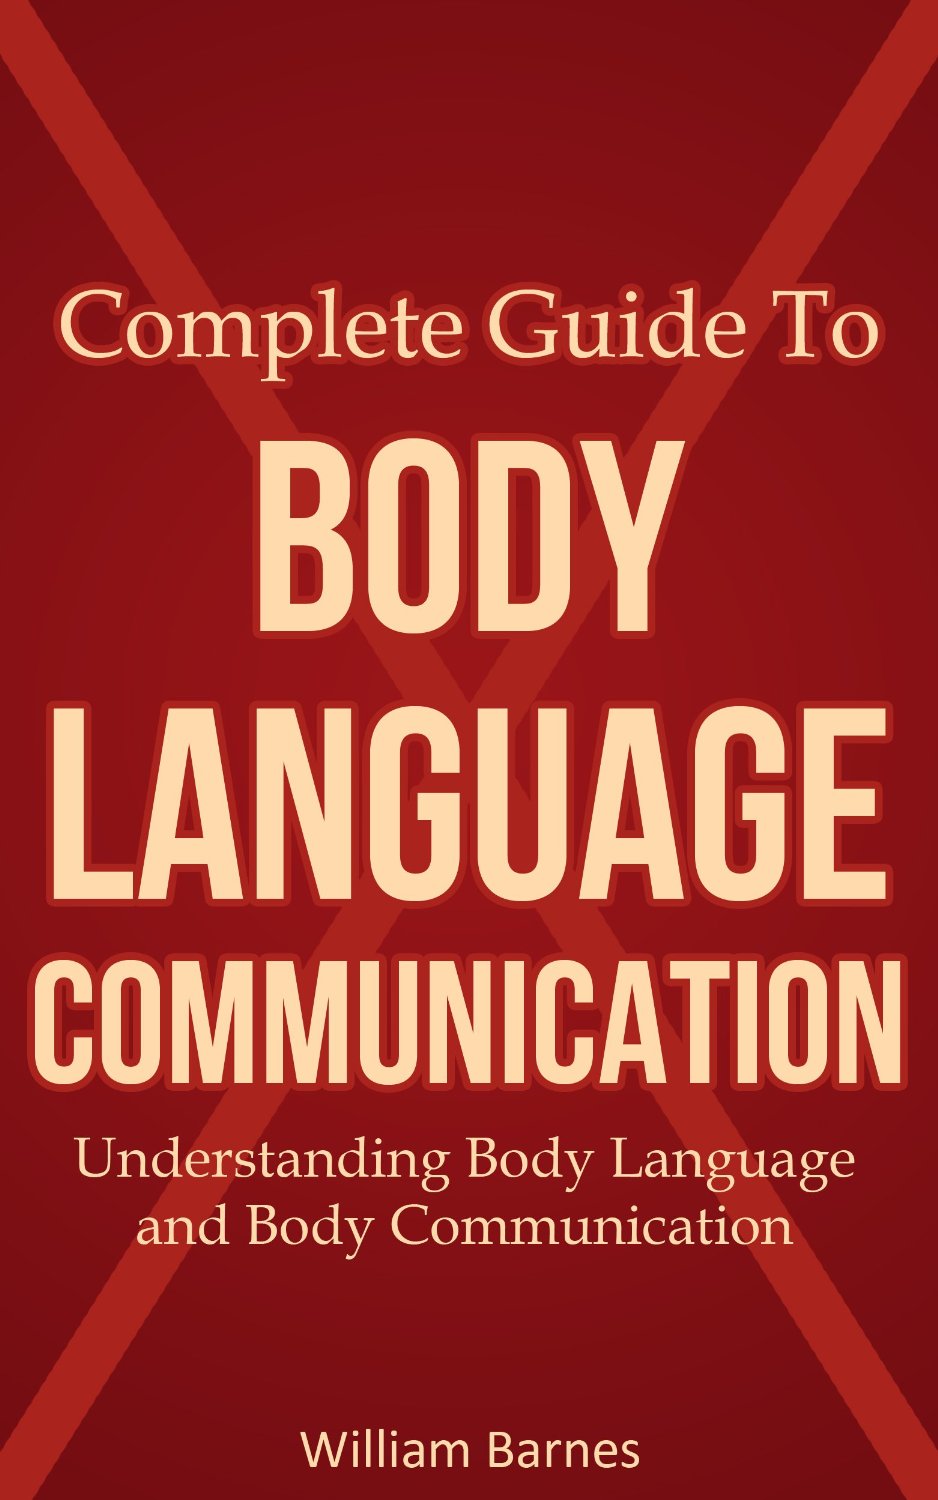 Complete Guide To Body Language Communication: Understanding Body Language and Body Communication by William Barnes